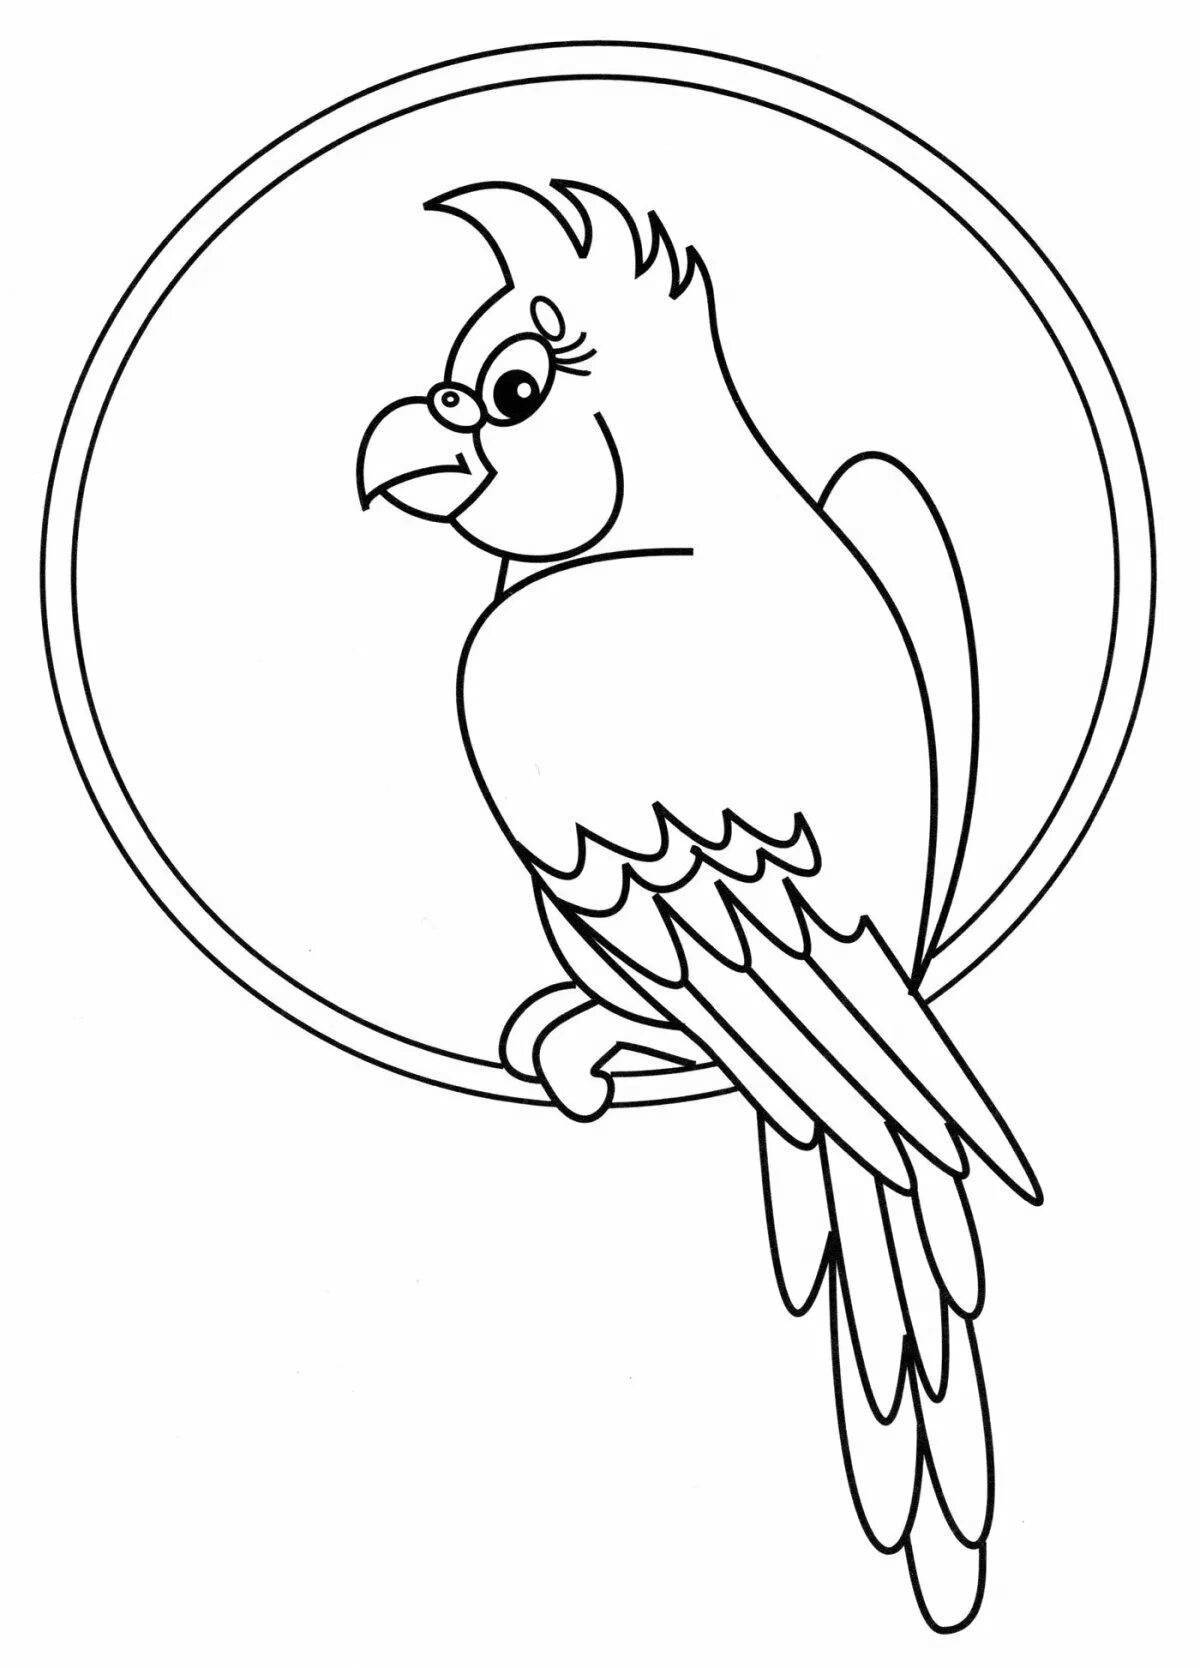 Coloring page happy parrot for children 3-4 years old